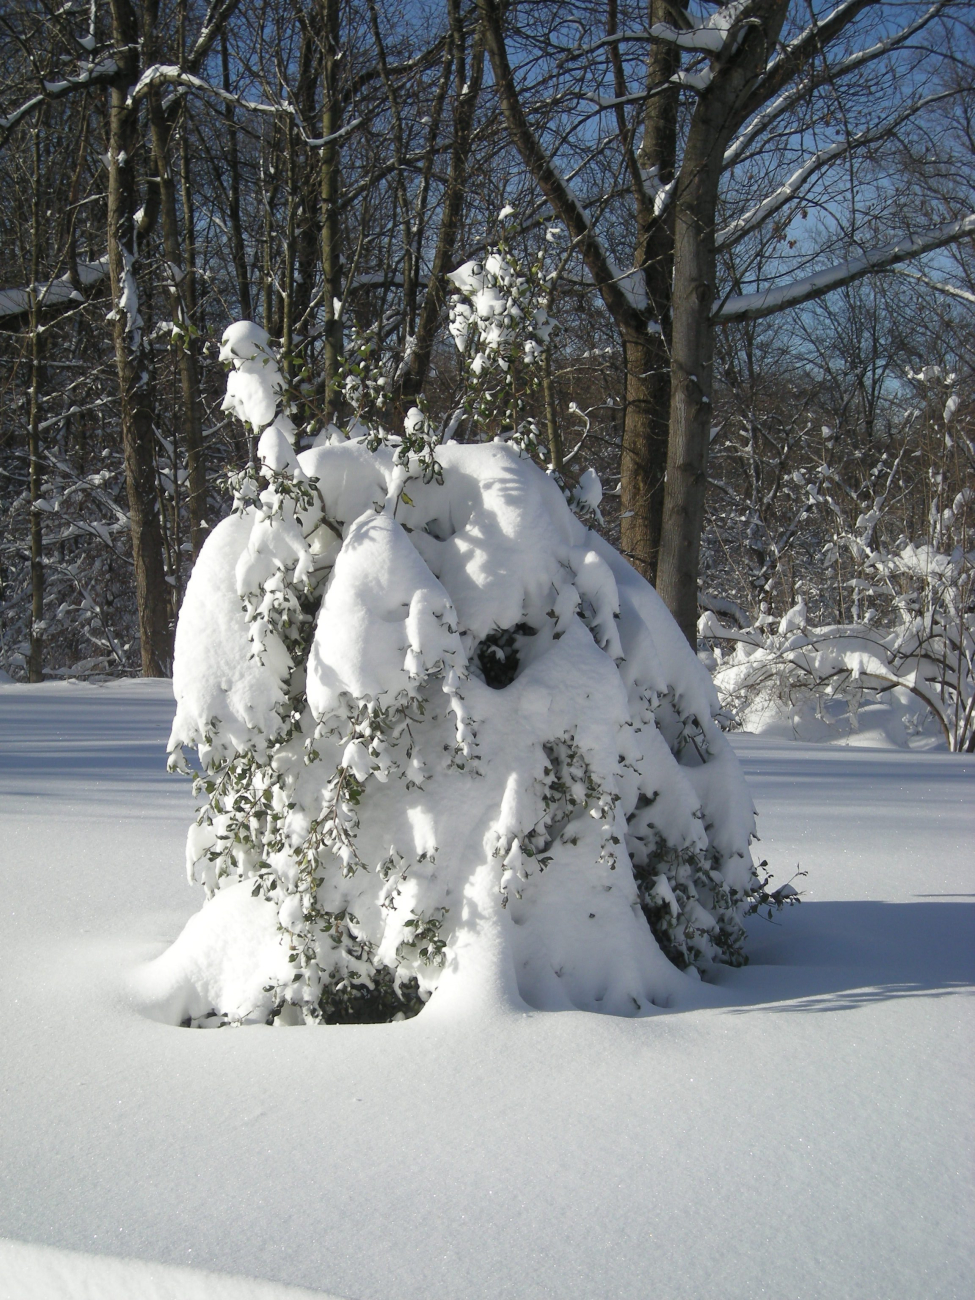 A holly tree bent over by the weight of wet snow